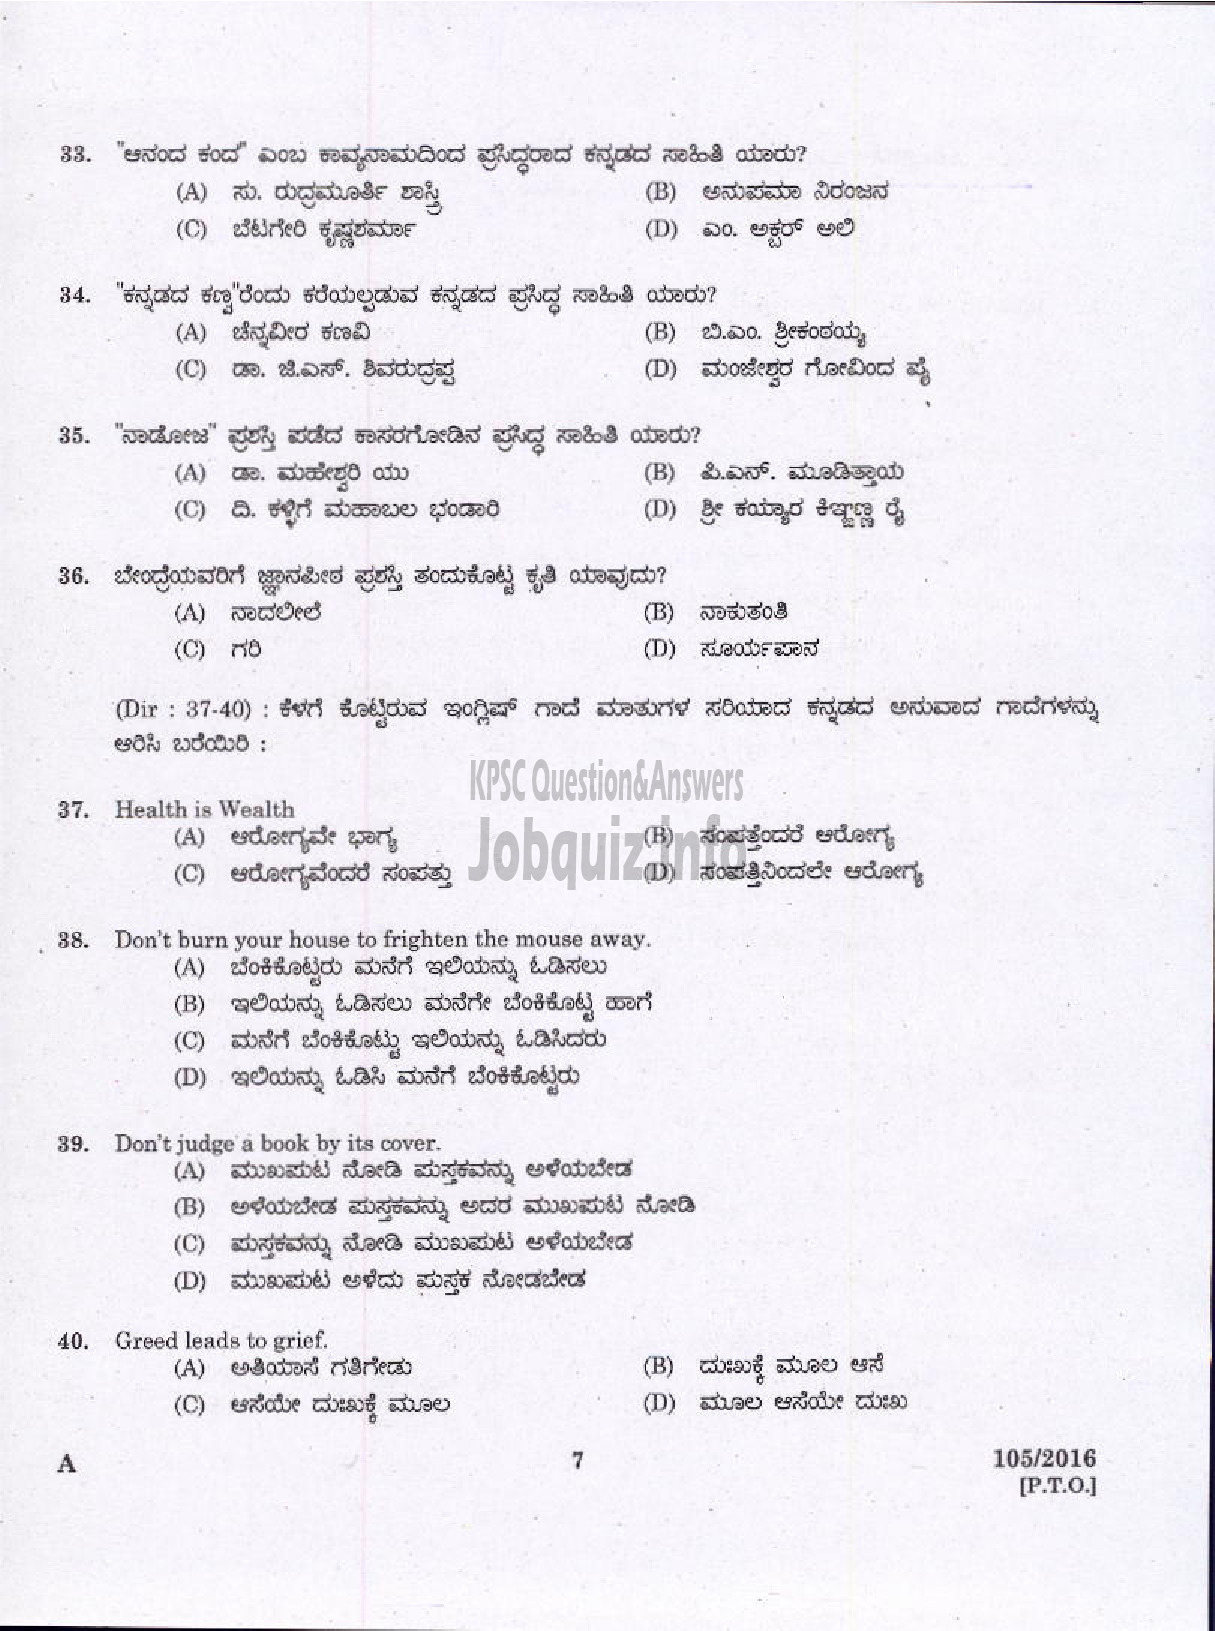 Kerala PSC Question Paper - LOWER DIVISION CLERK KANNADA AND MALAYALAM KNOWING VARIOUS-5